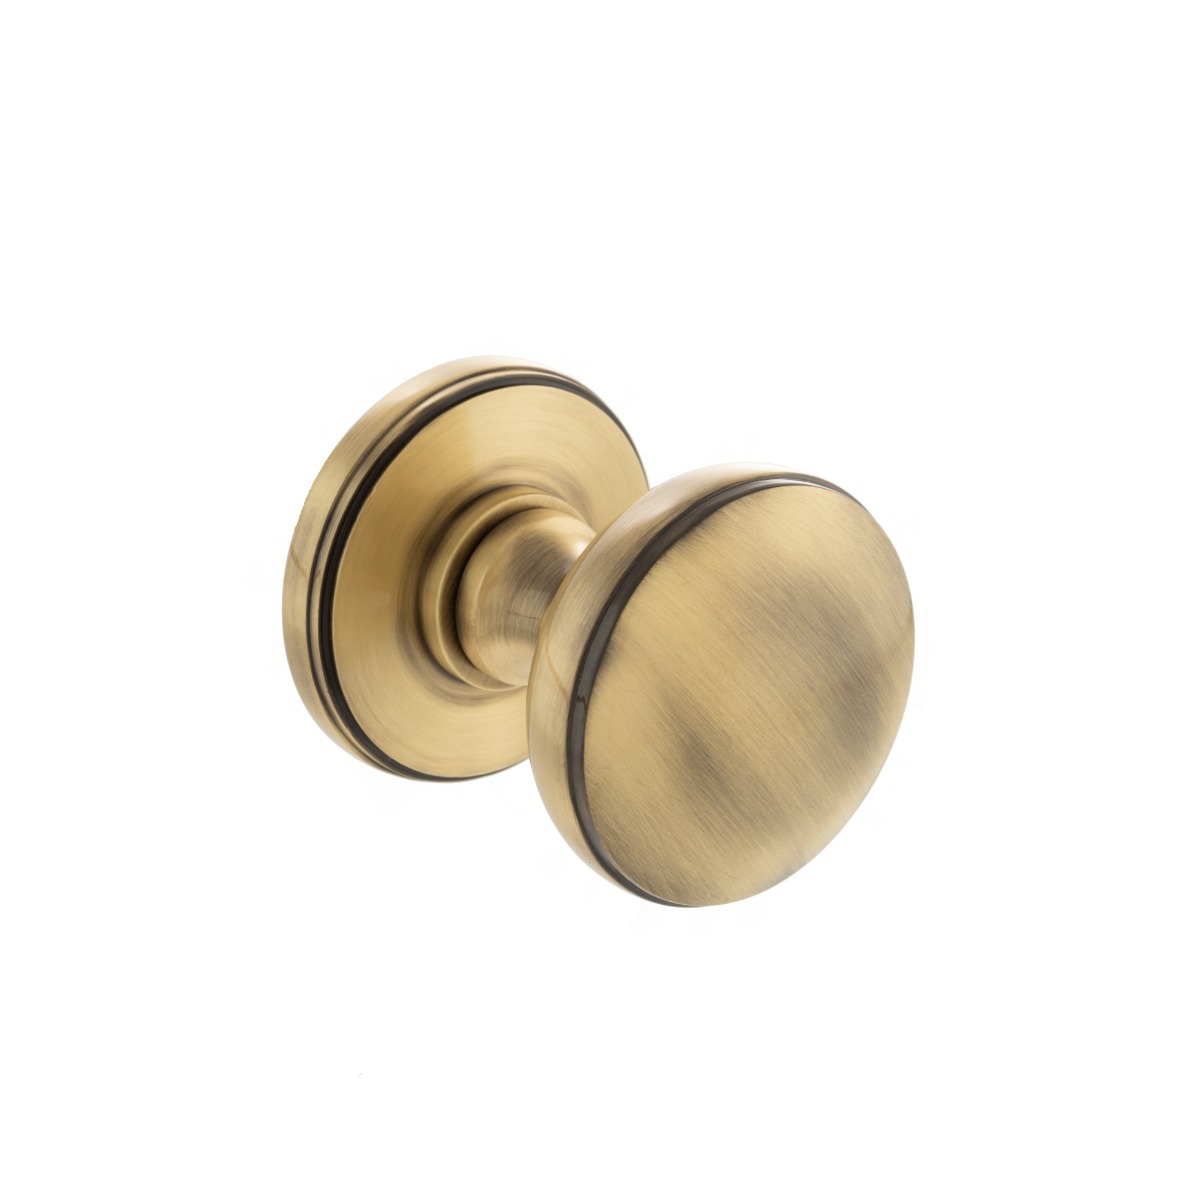 Millhouse Brass Edison Solid Brass Domed Mortice Knob on Concealed Fix Rose - Antique Brass MH400DMKAB